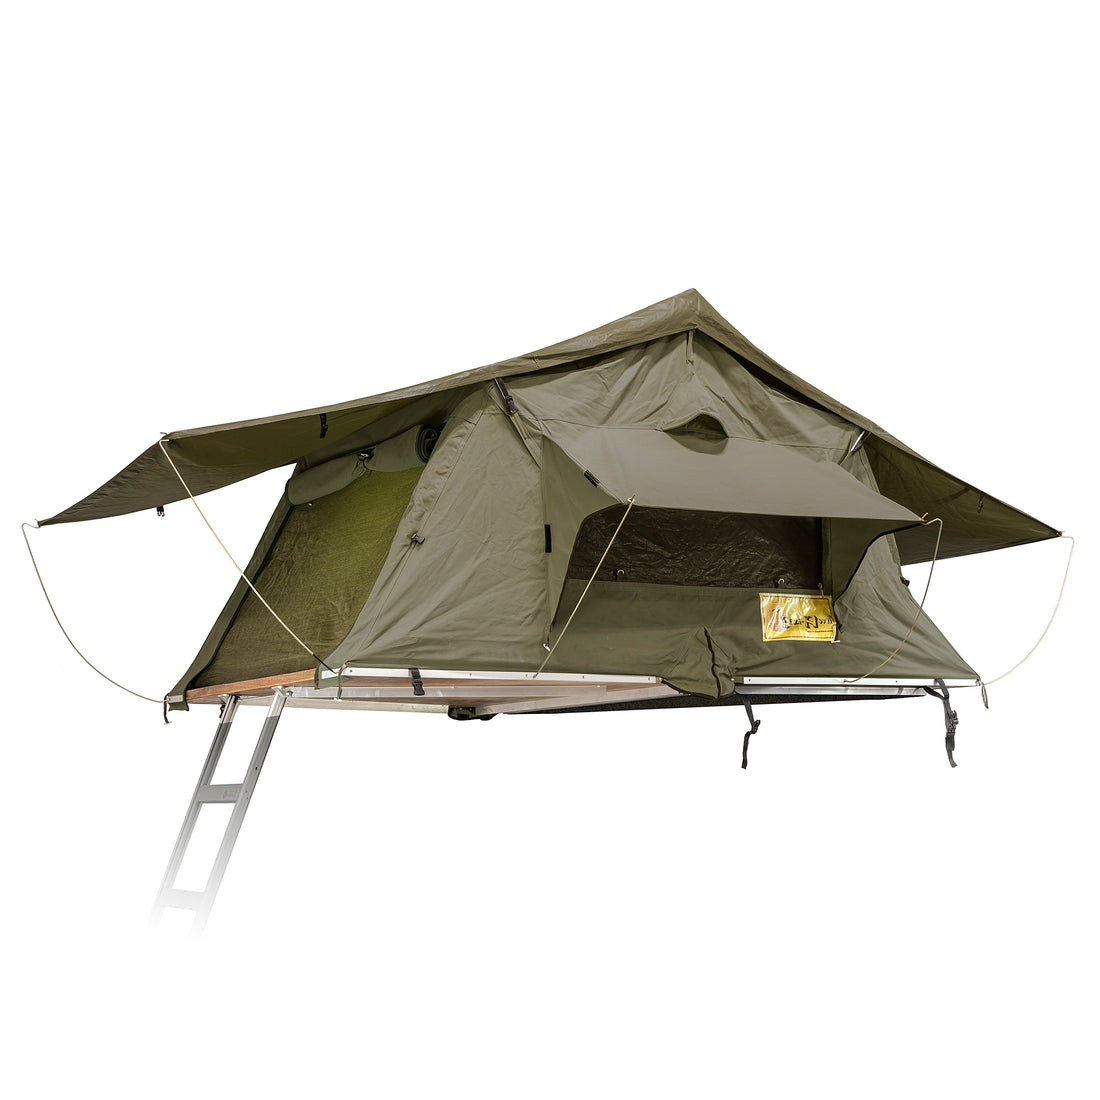 Construction Tents Made in USA